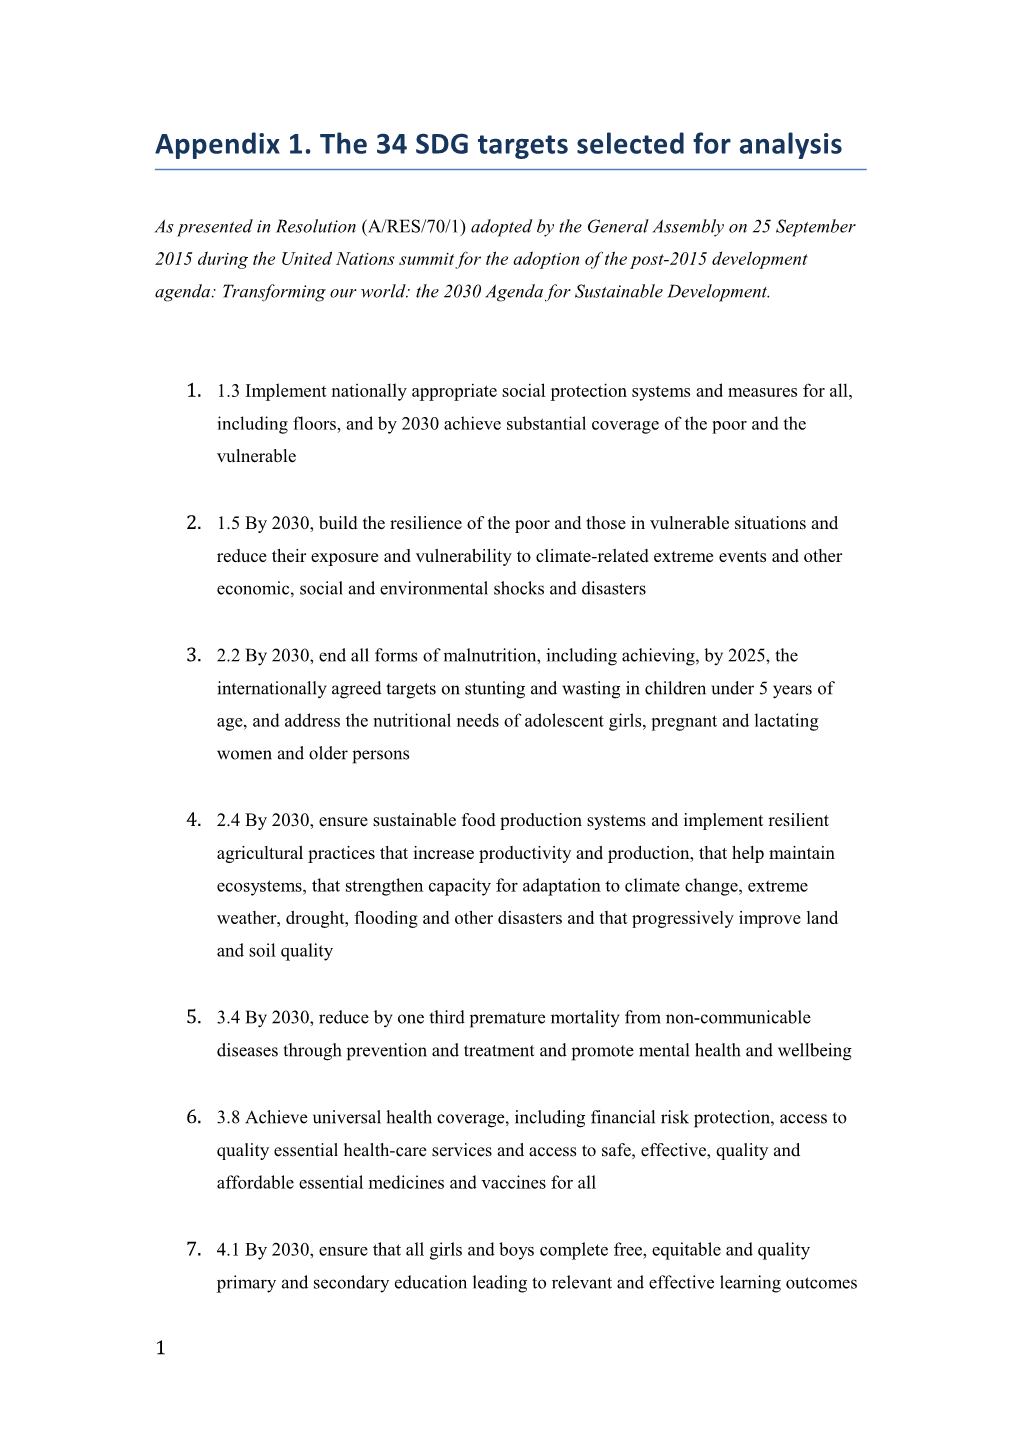 Appendix 1. the 34 SDG Targets Selected for Analysis